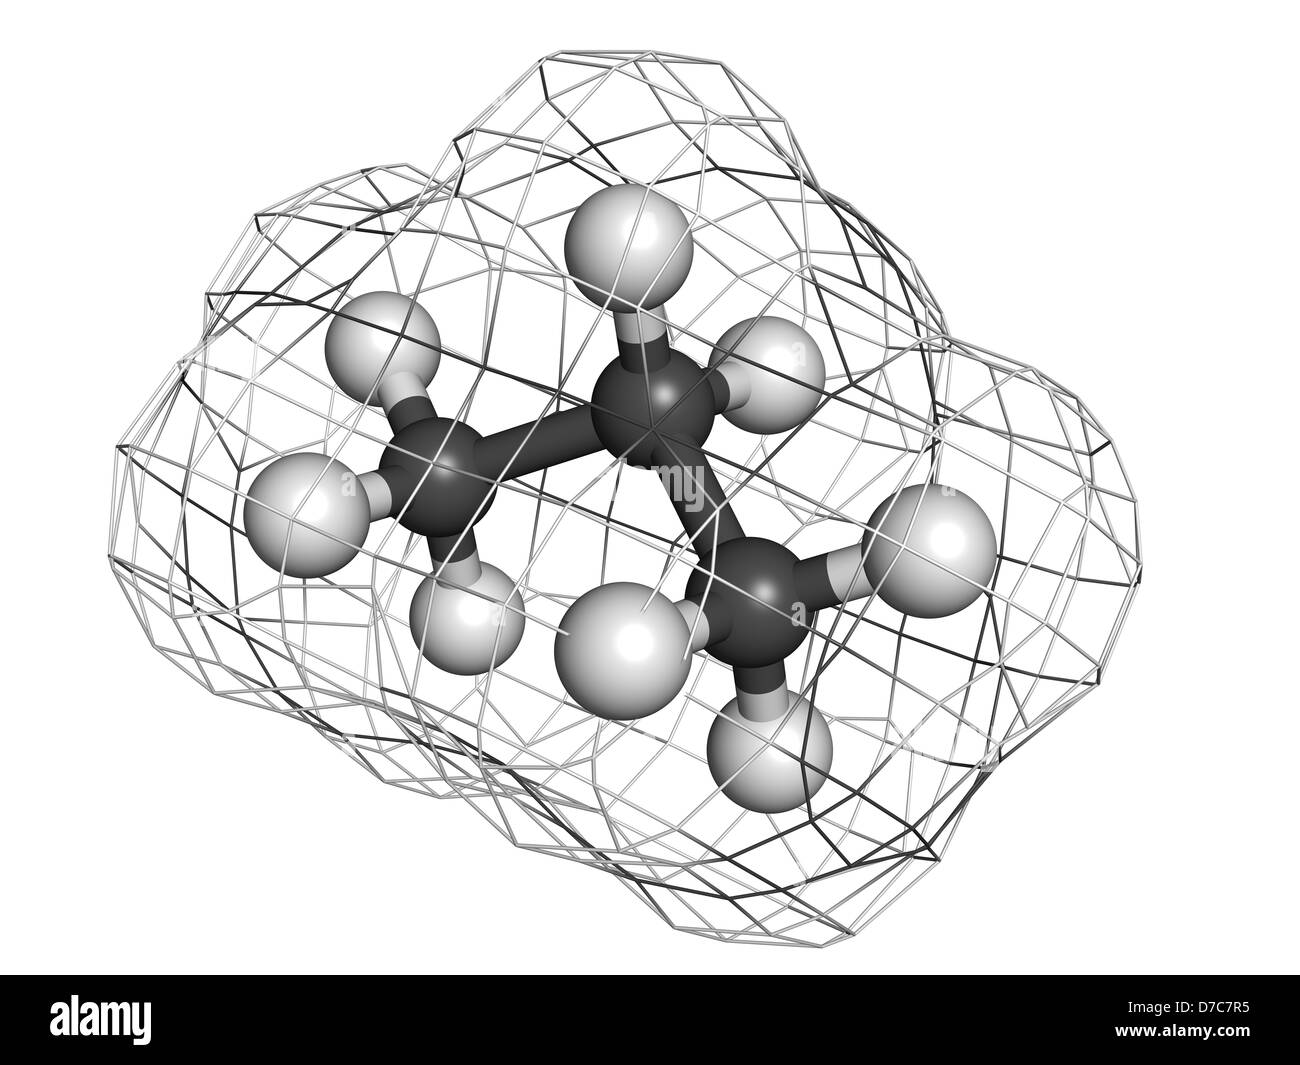 Propane molecule Black and White Stock Photos & Images - Alamy